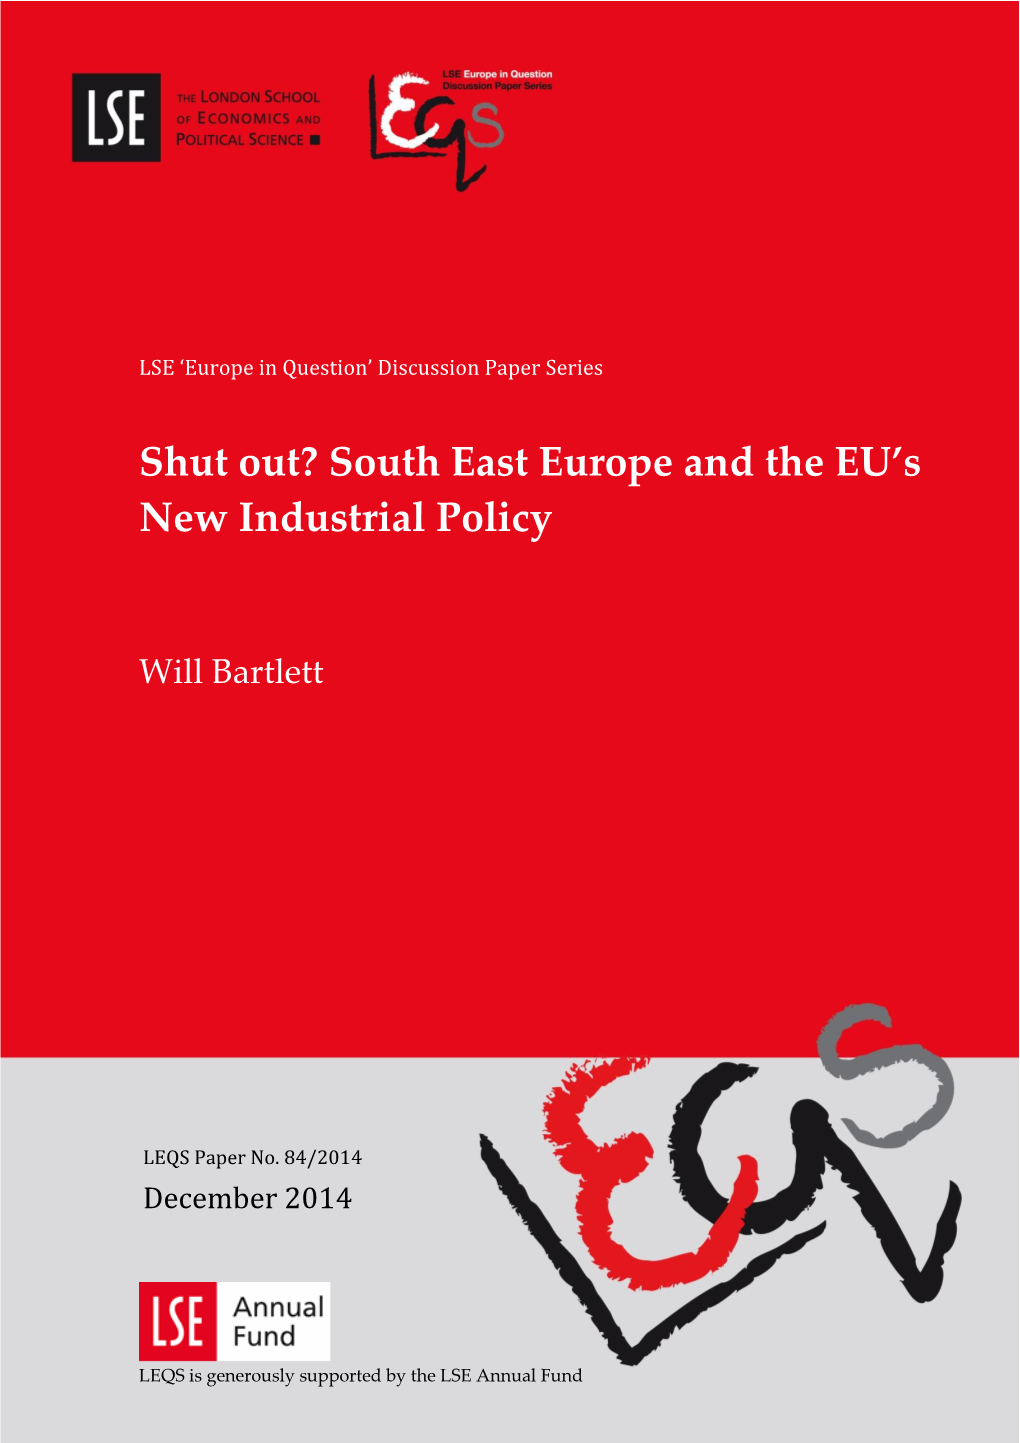 Shut Out? South East Europe and the EU's New Industrial Policy